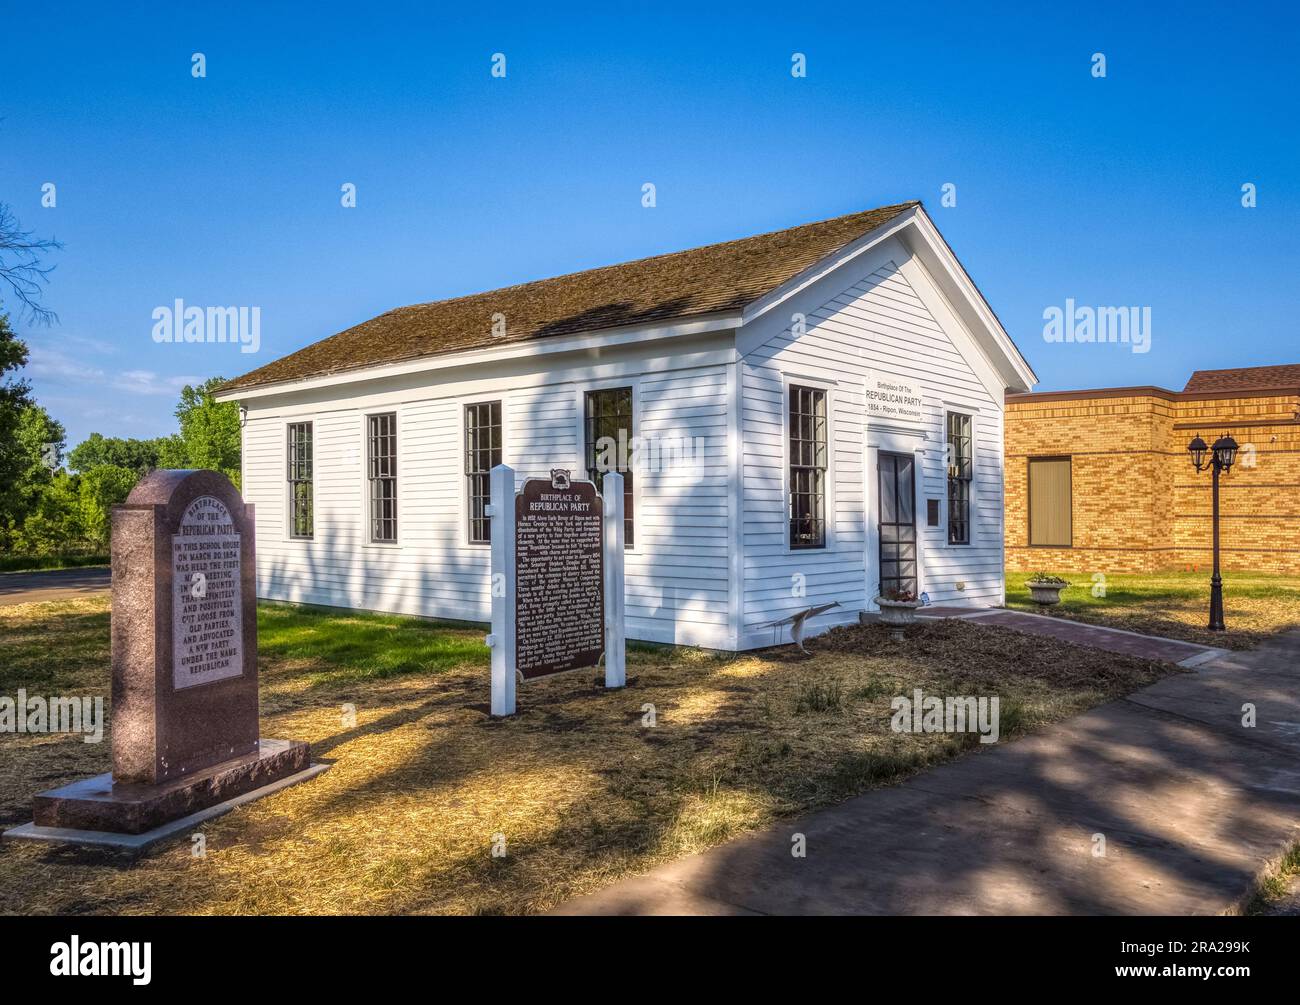 The Little White Schoolhouse the Birthplace of the Republican Party Muweum & legacy Center in Ripon Wisconsin Stock Photo